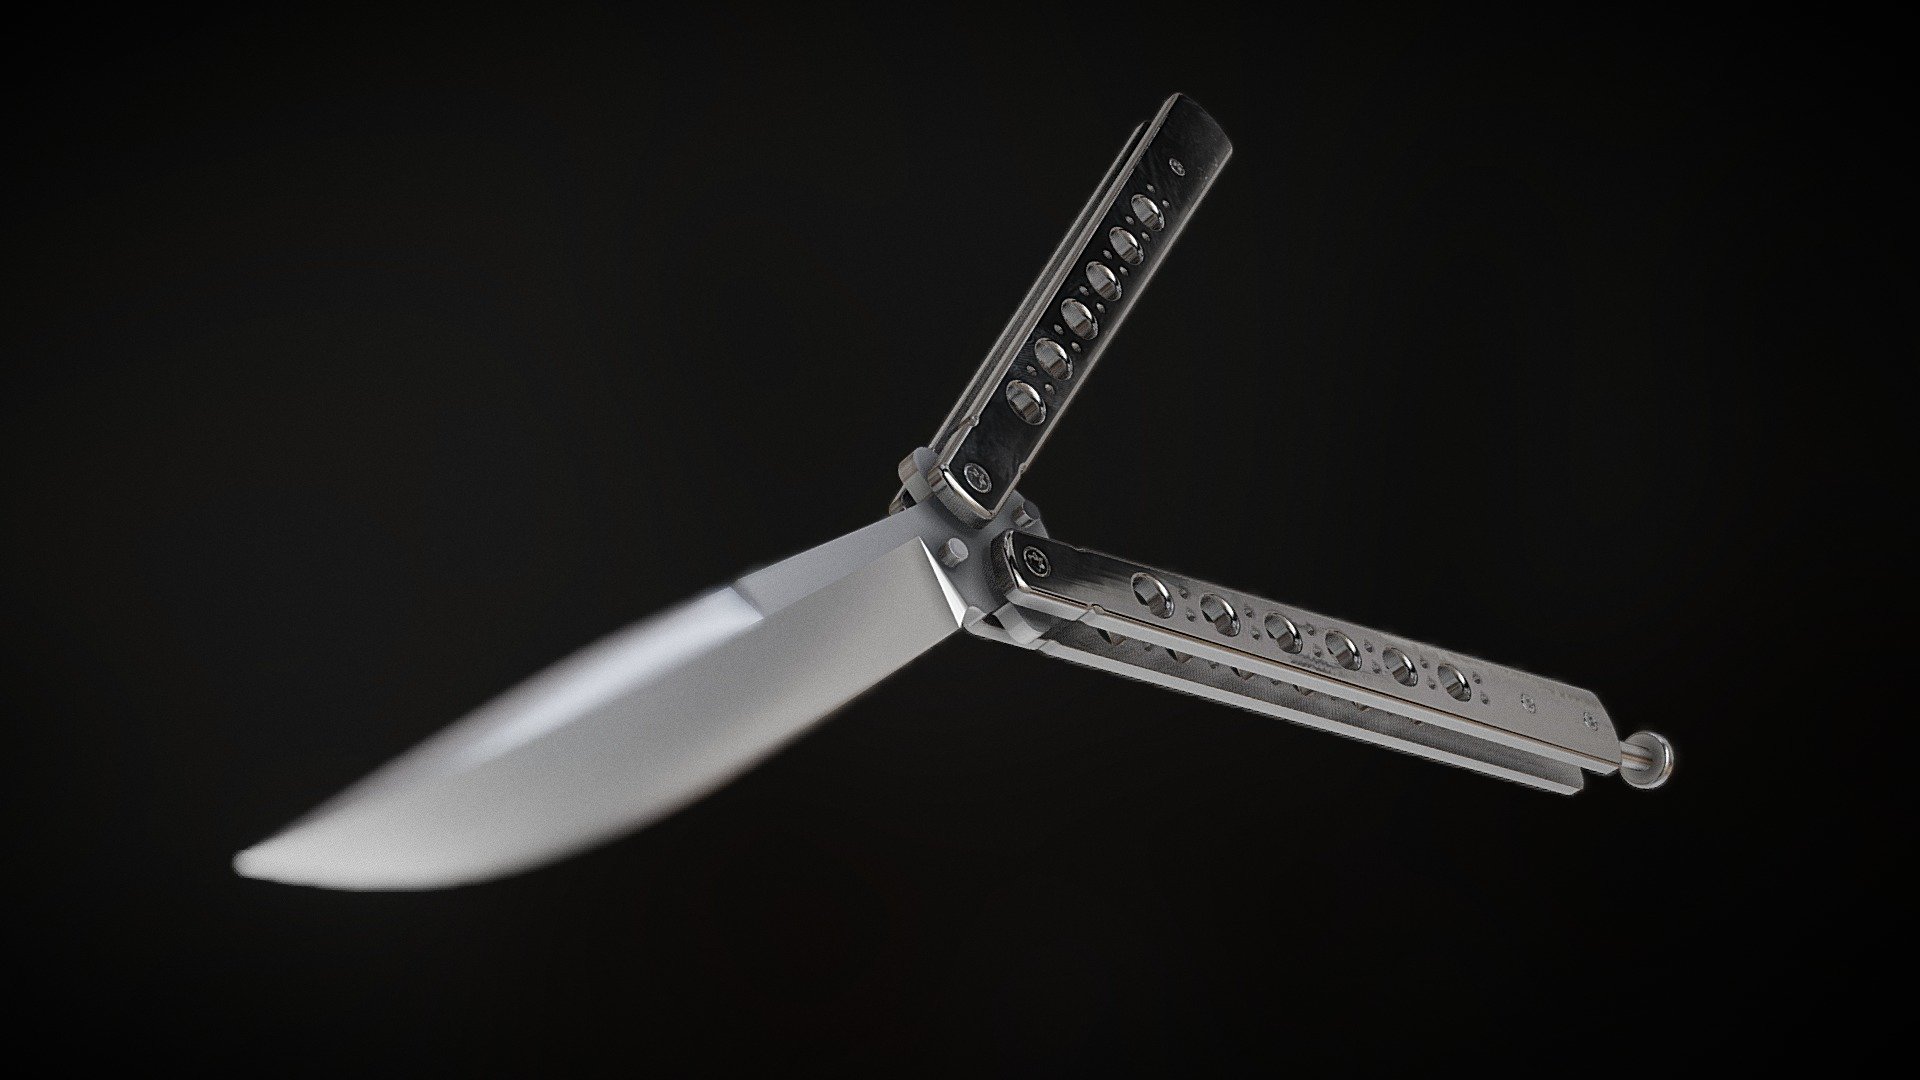 3D model of a balisong/butterfly knife, classic design full metal.
Original file made in Rhinoceros, included in the additional files (closed + open).

The most similar product is the Balisong Knife by SteelClaw:


https://www.militaryworldsrl.com/en/total-silver-butterfly-knife-in-440-stainless-steel-coly01/ - Classic Balisong Knife - Buy Royalty Free 3D model by Mario Falasca (@marfal) 3d model